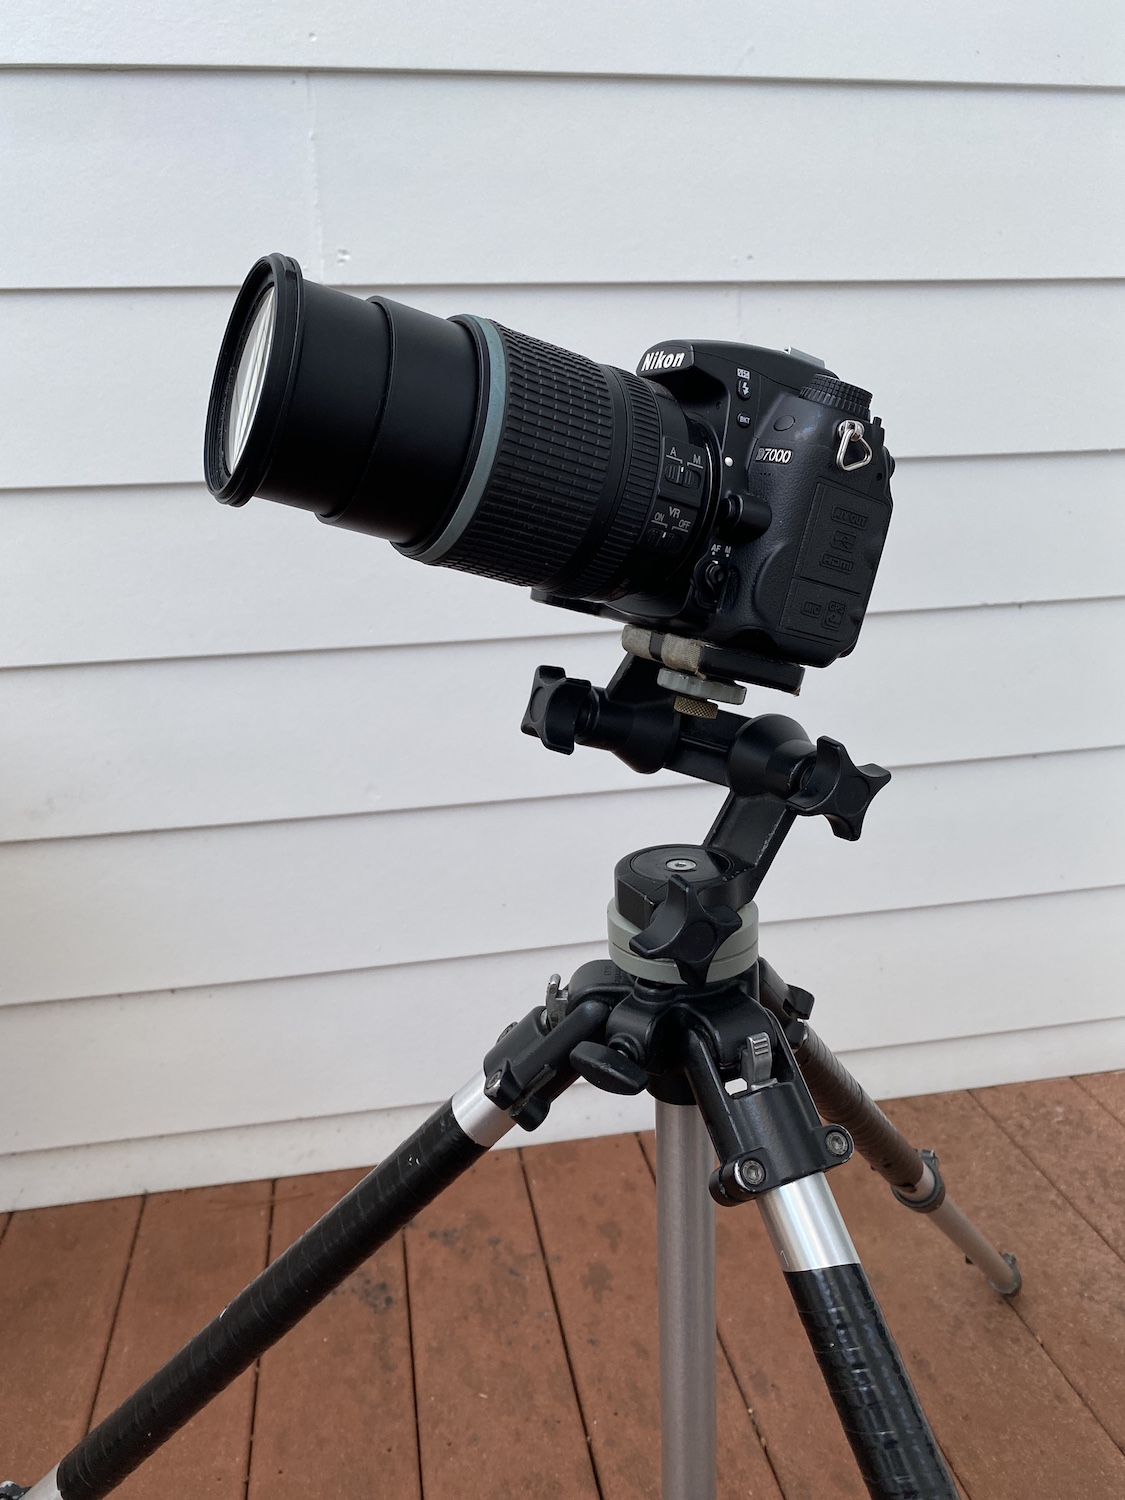 Nikon D7000 (unmodified), with Nikkor AF-S DX 18-140mm f/3.5-5.6 G ED VR zoom lens and sturdy camera tripod